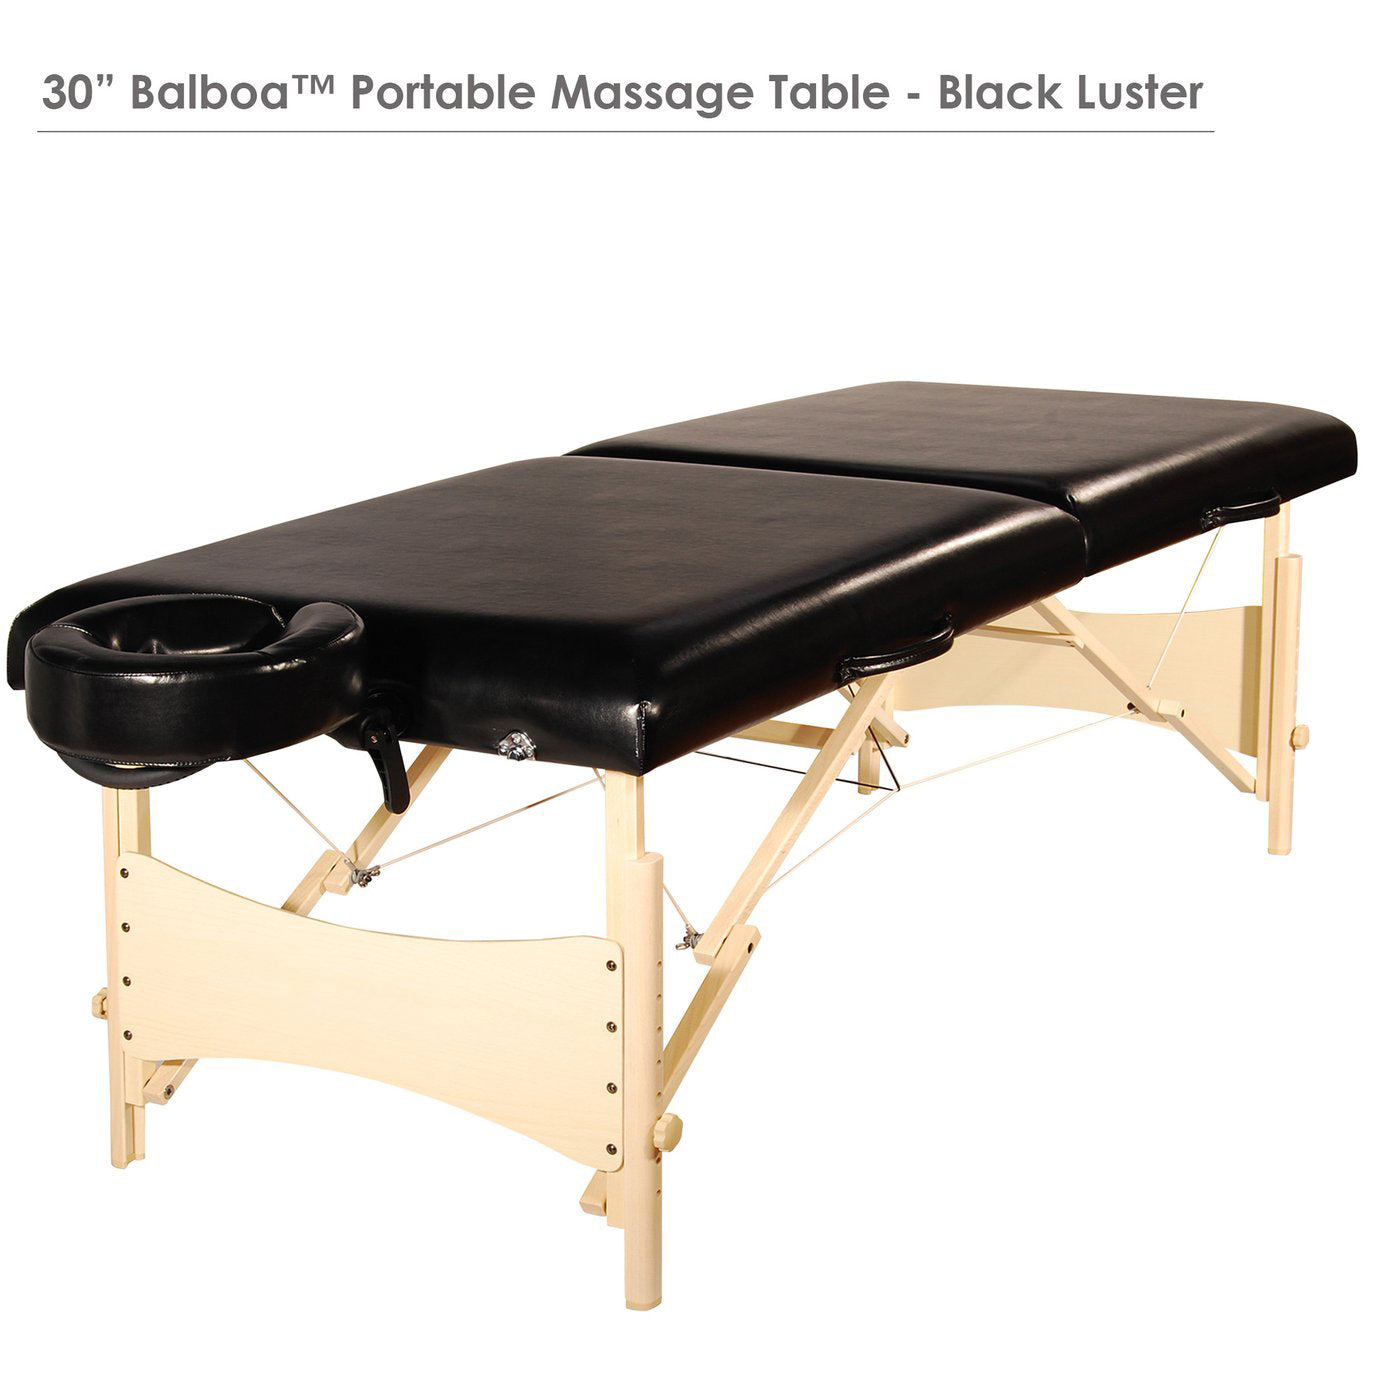 30" Balboa™ Portable Massage & Exercise Table Package, Cream Luster